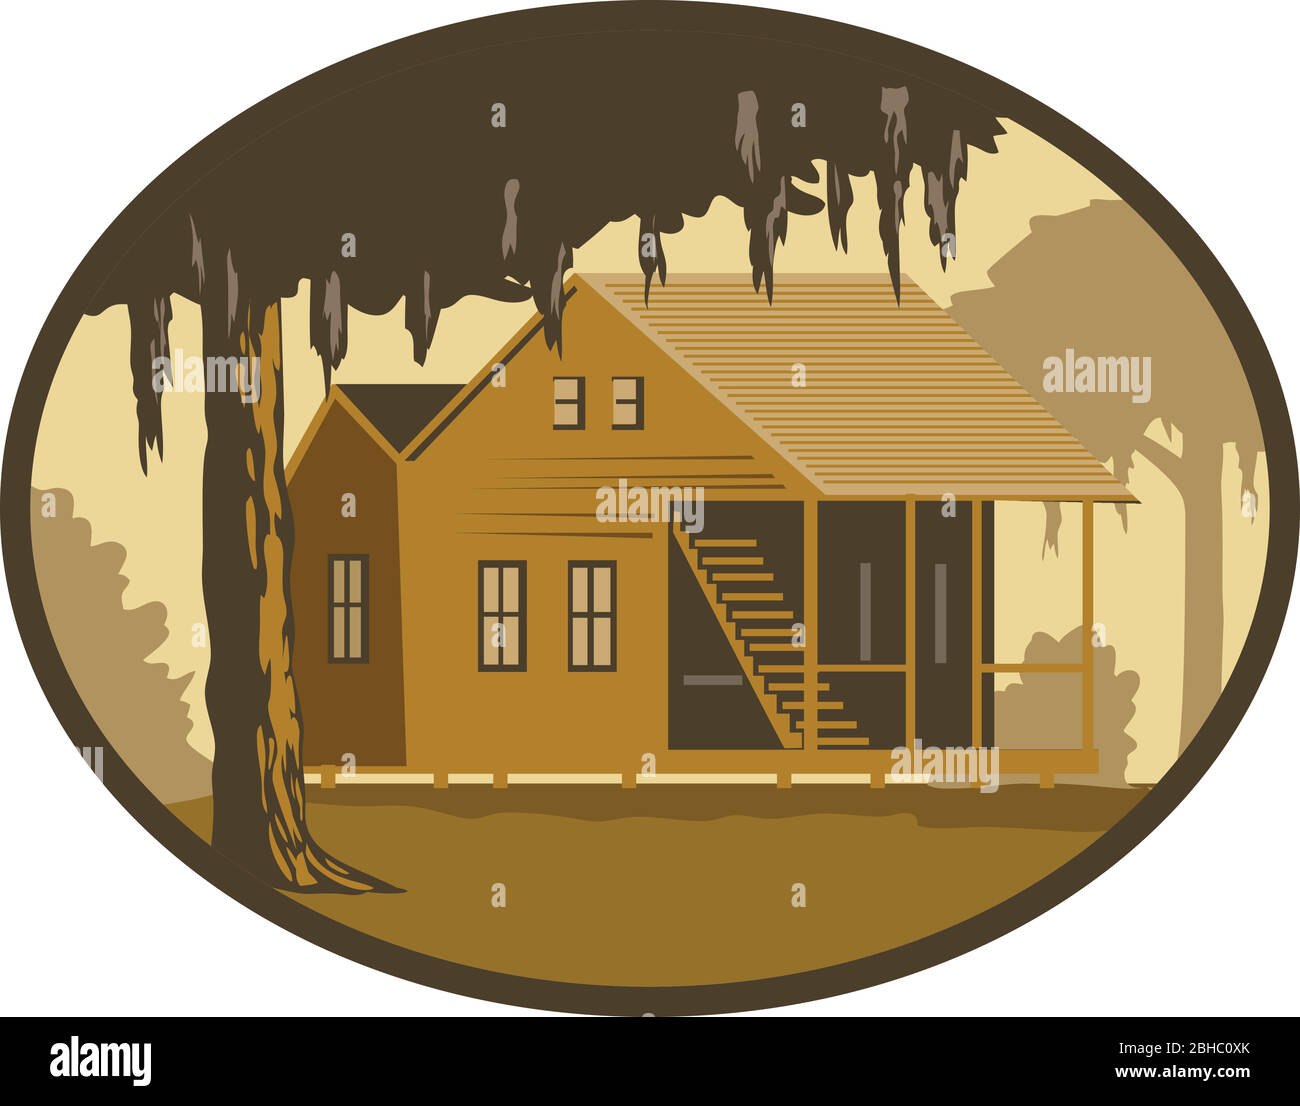 Retro wpa style illustration of a typical Cajun house, a country French architecture found in Louisiana and across the American southeast, maritime Ca Stock Vector